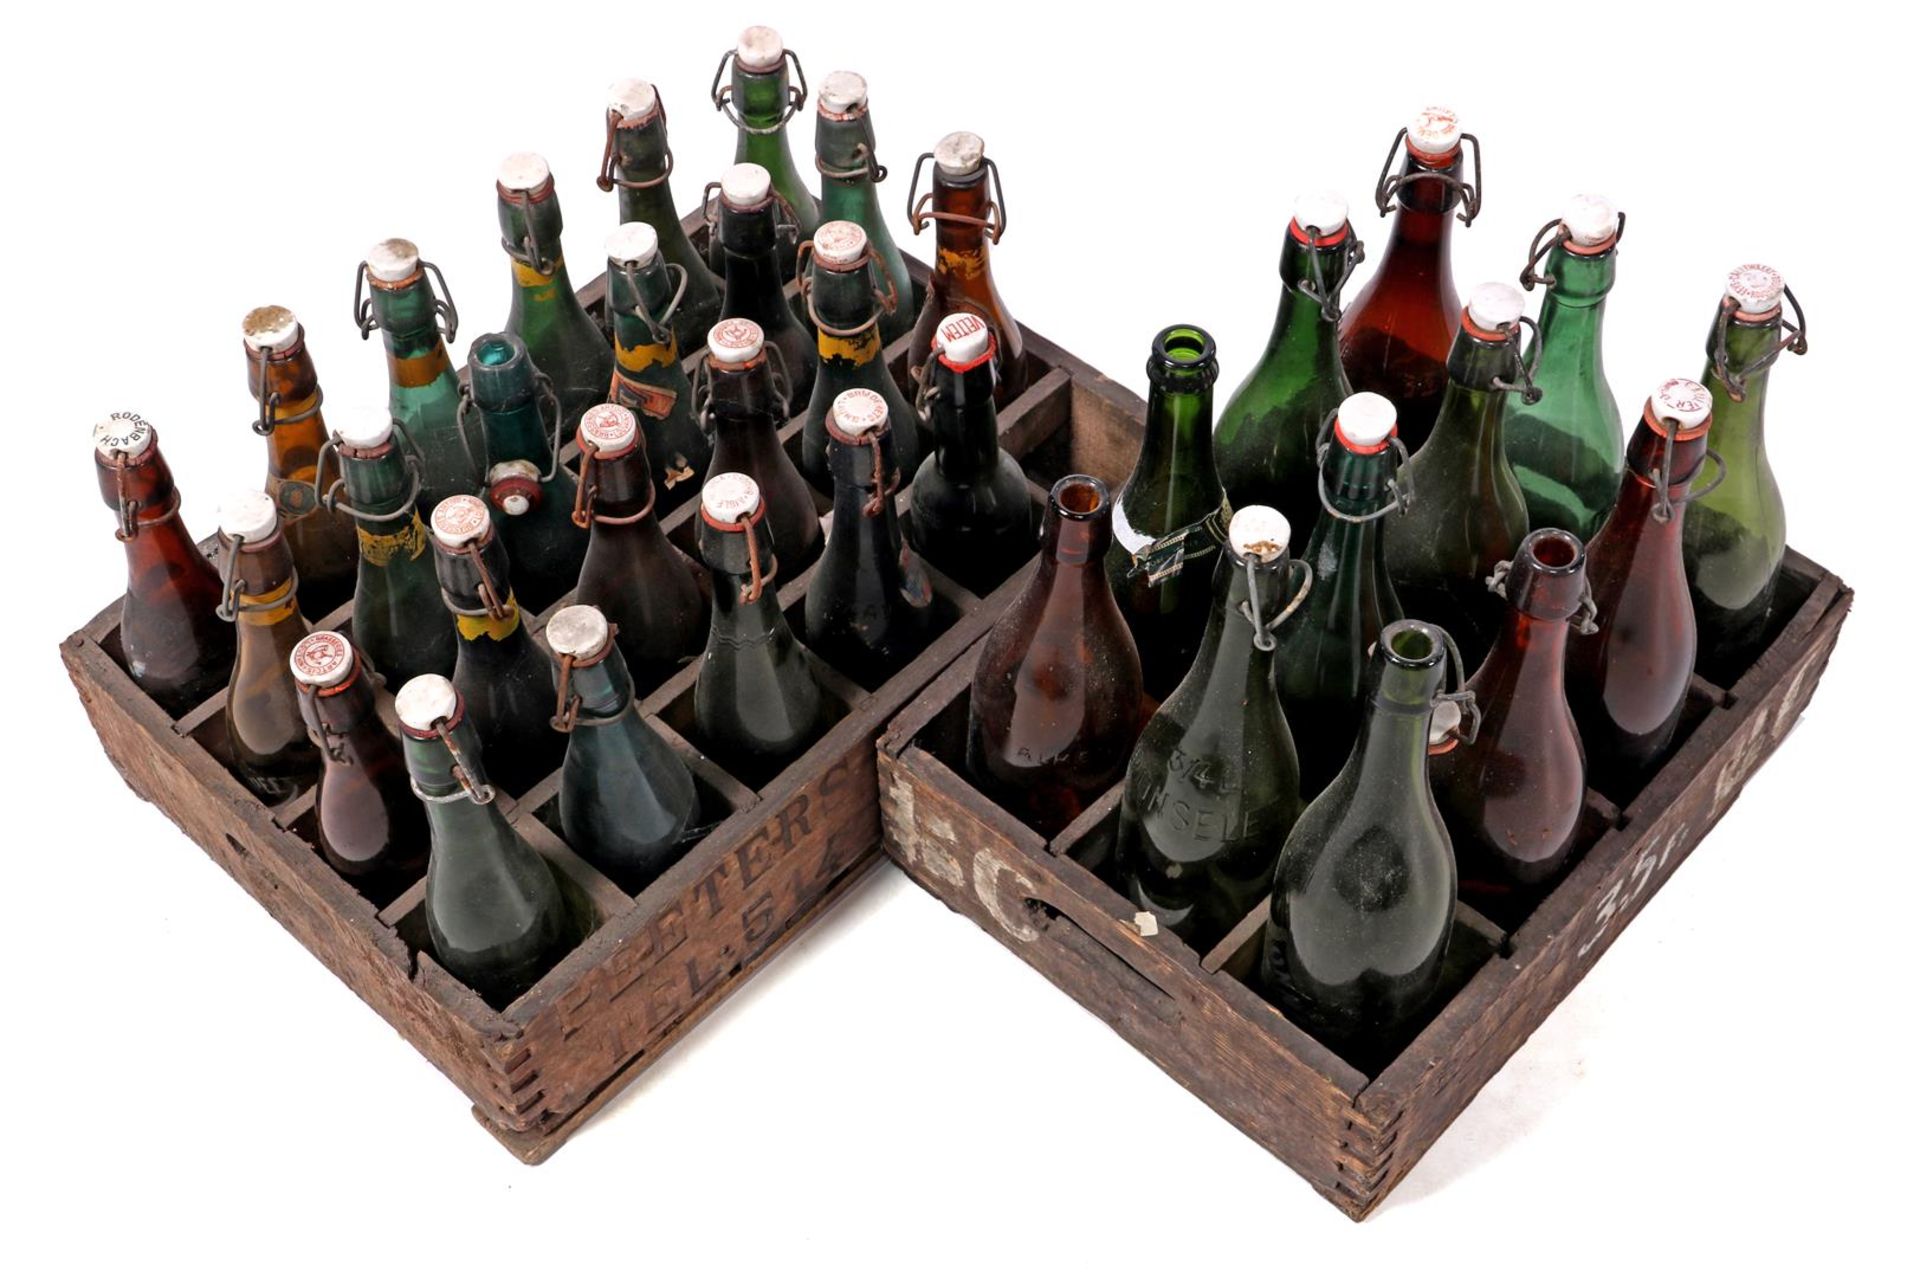 2 crates with green beer bottles